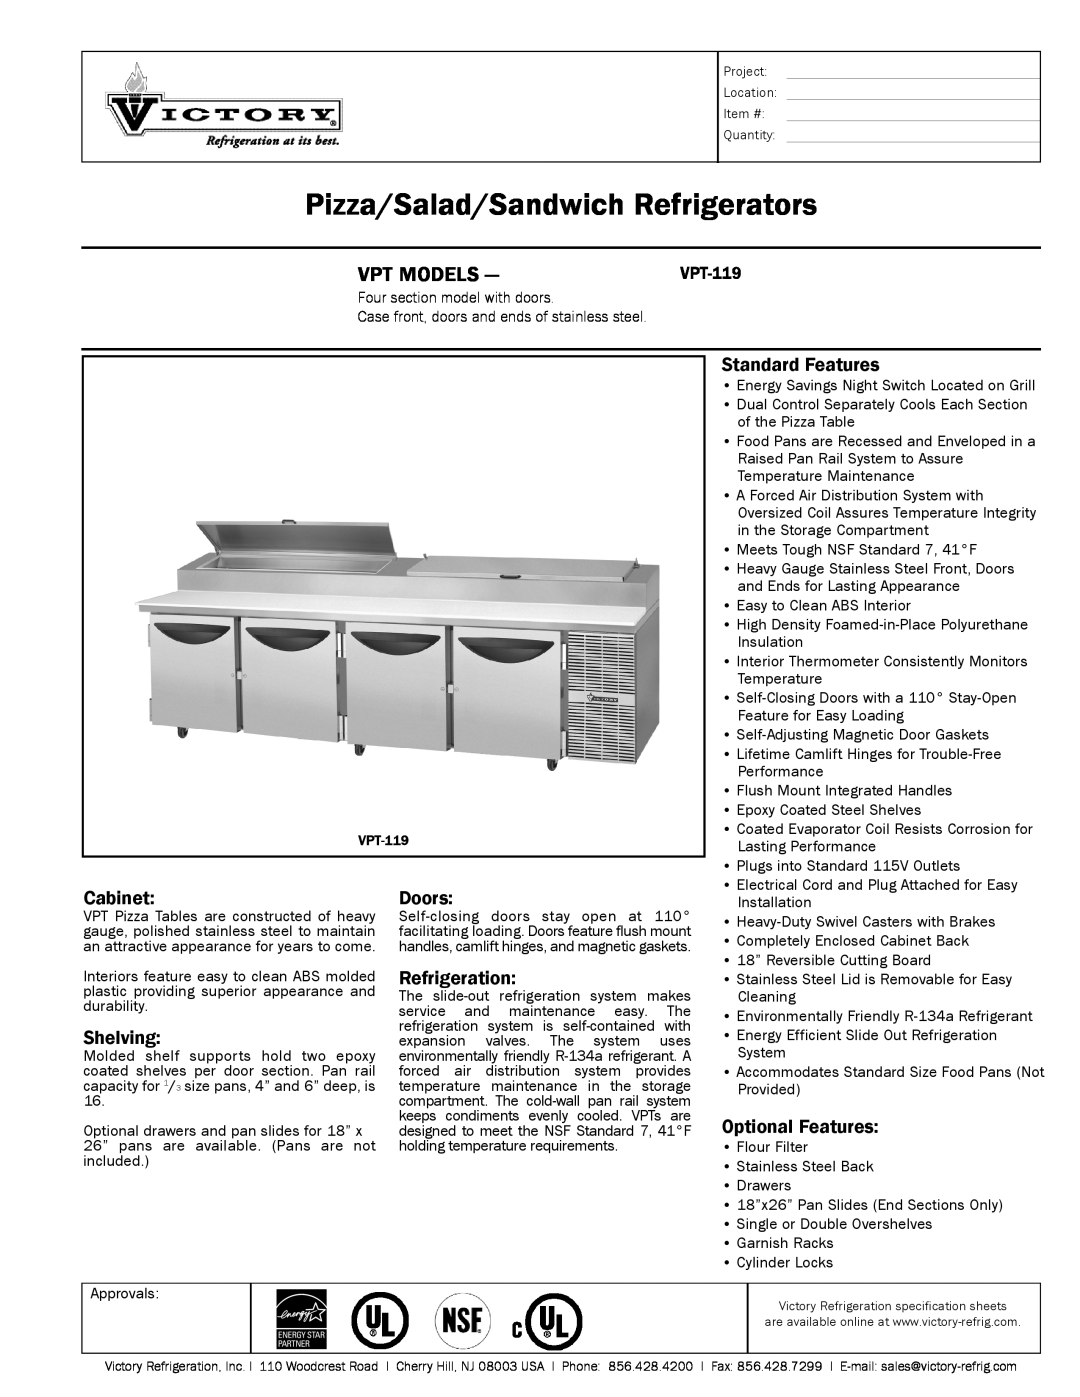 Victory Refrigeration VPT-119 specifications Pizza/Salad/Sandwich Refrigerators, Vpt Models, Standard Features, Cabinet 